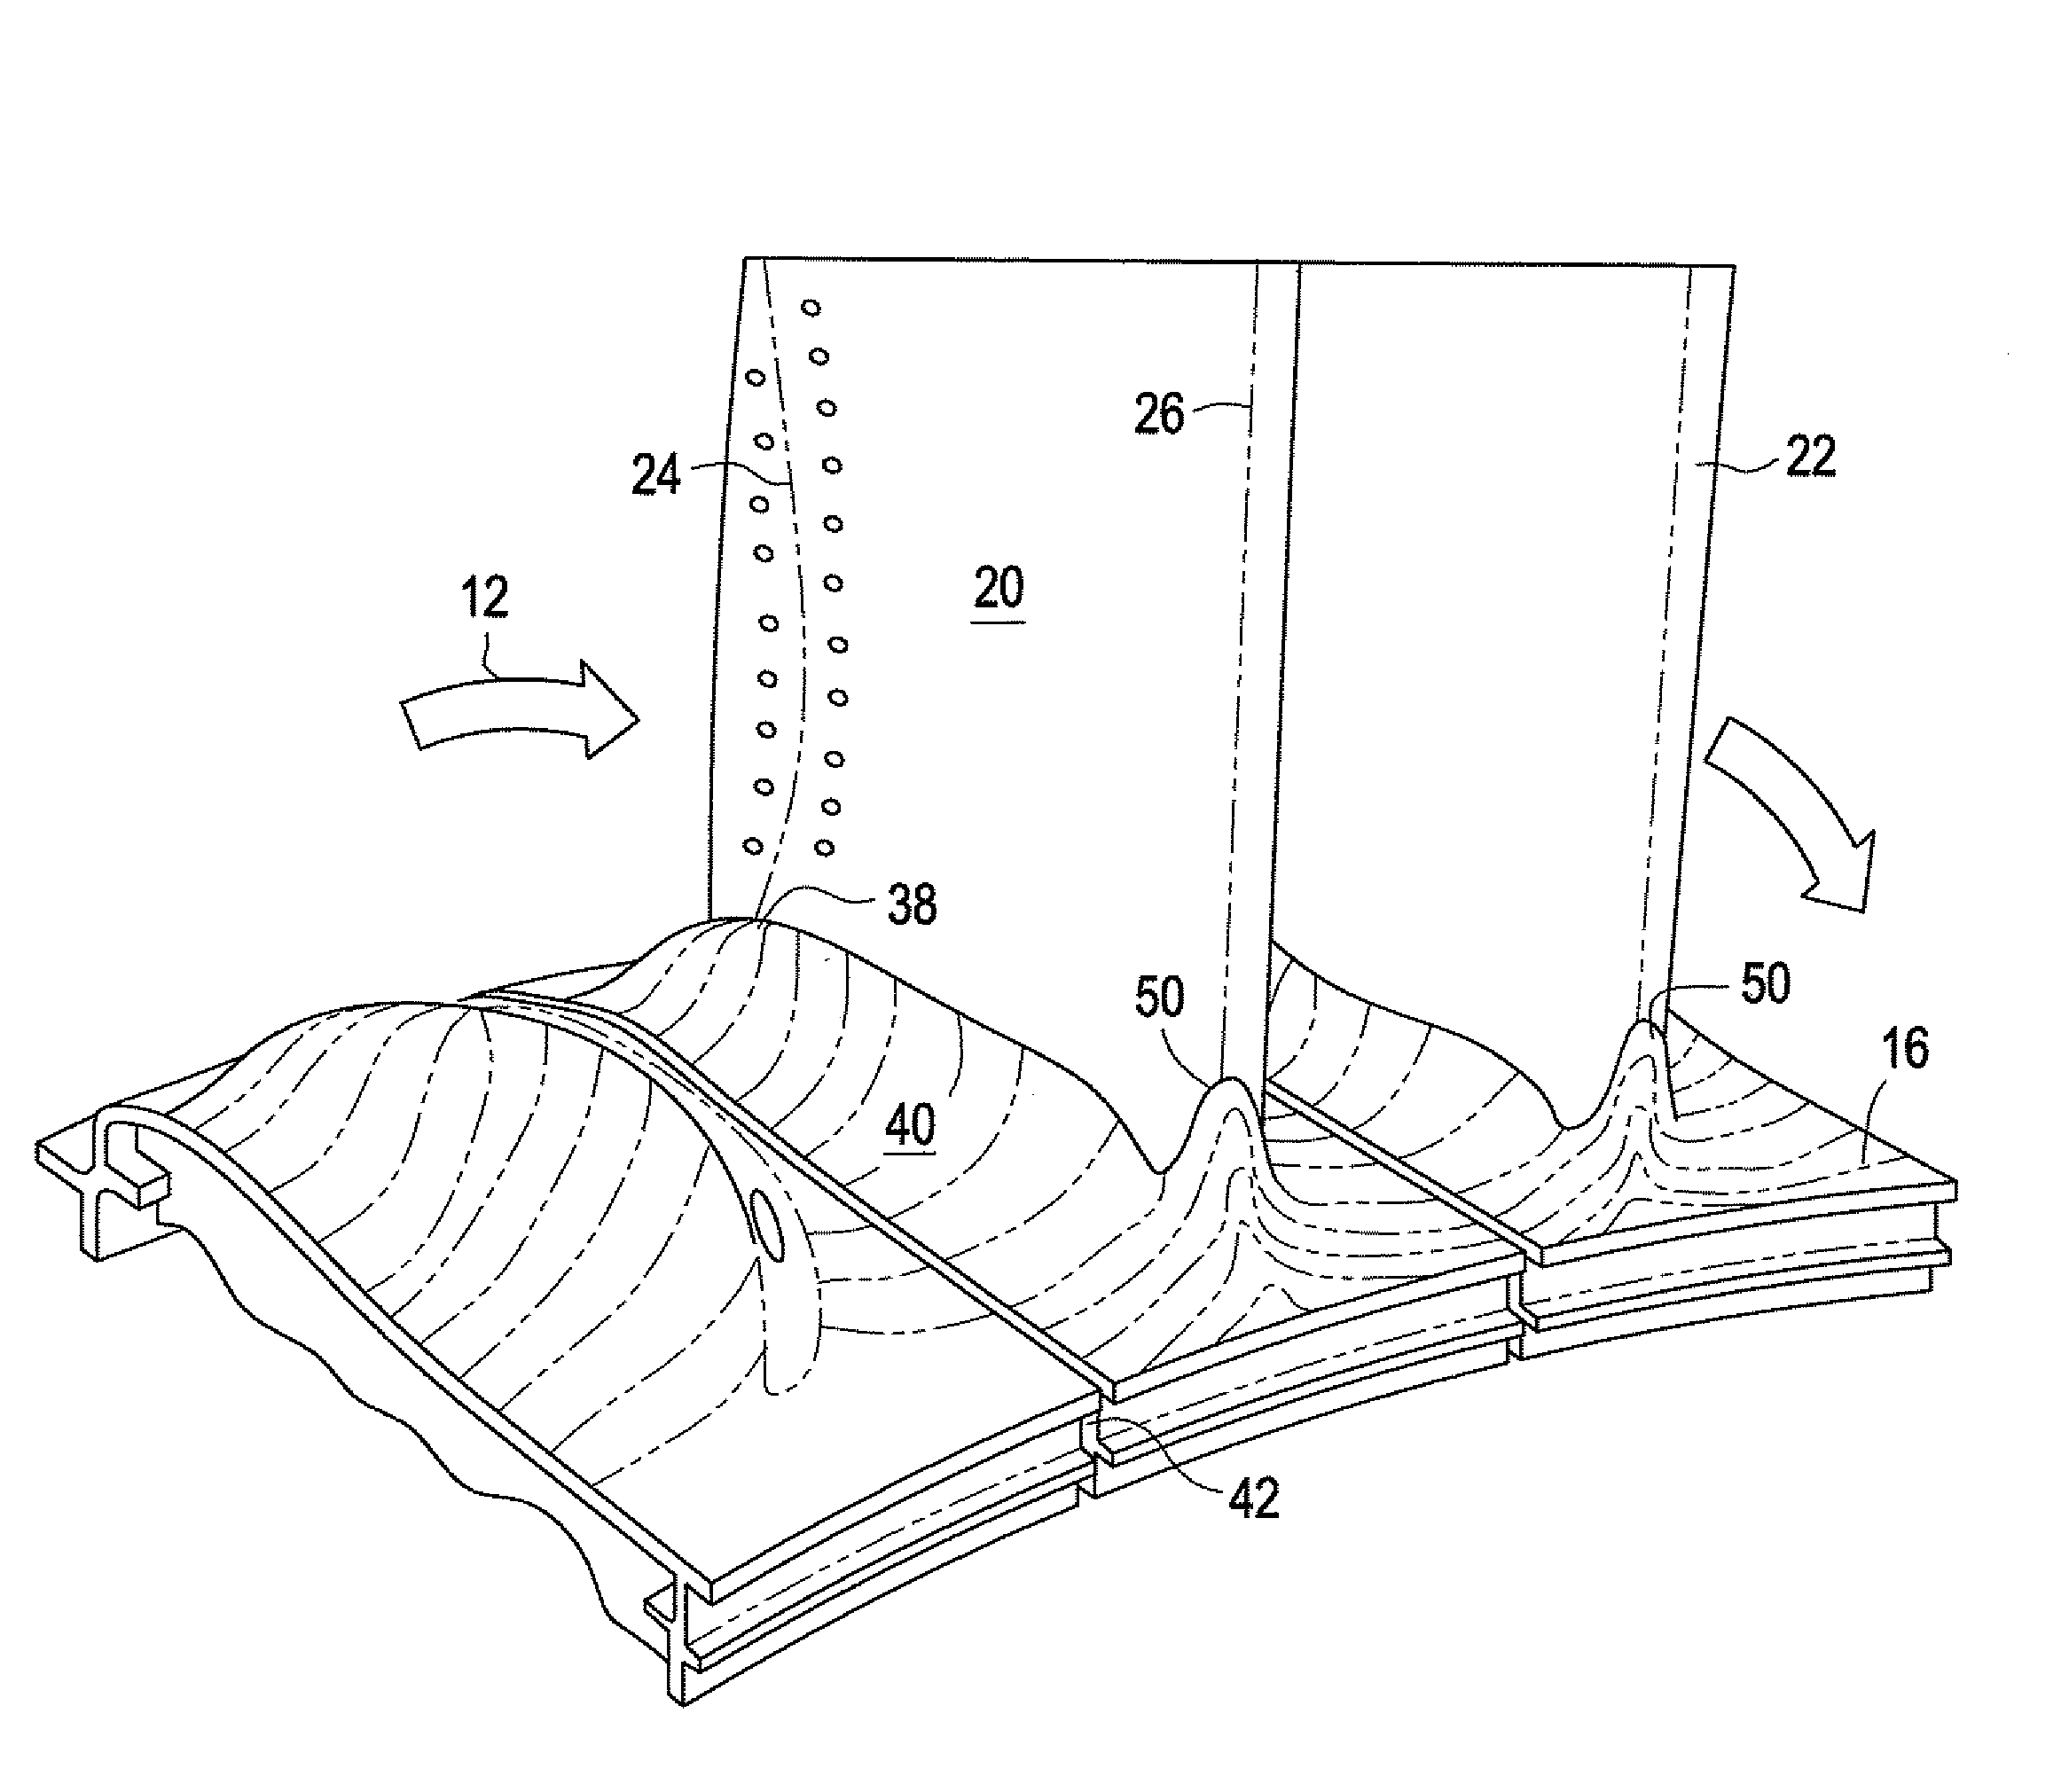 Scalloped surface turbine stage with trailing edge ridges